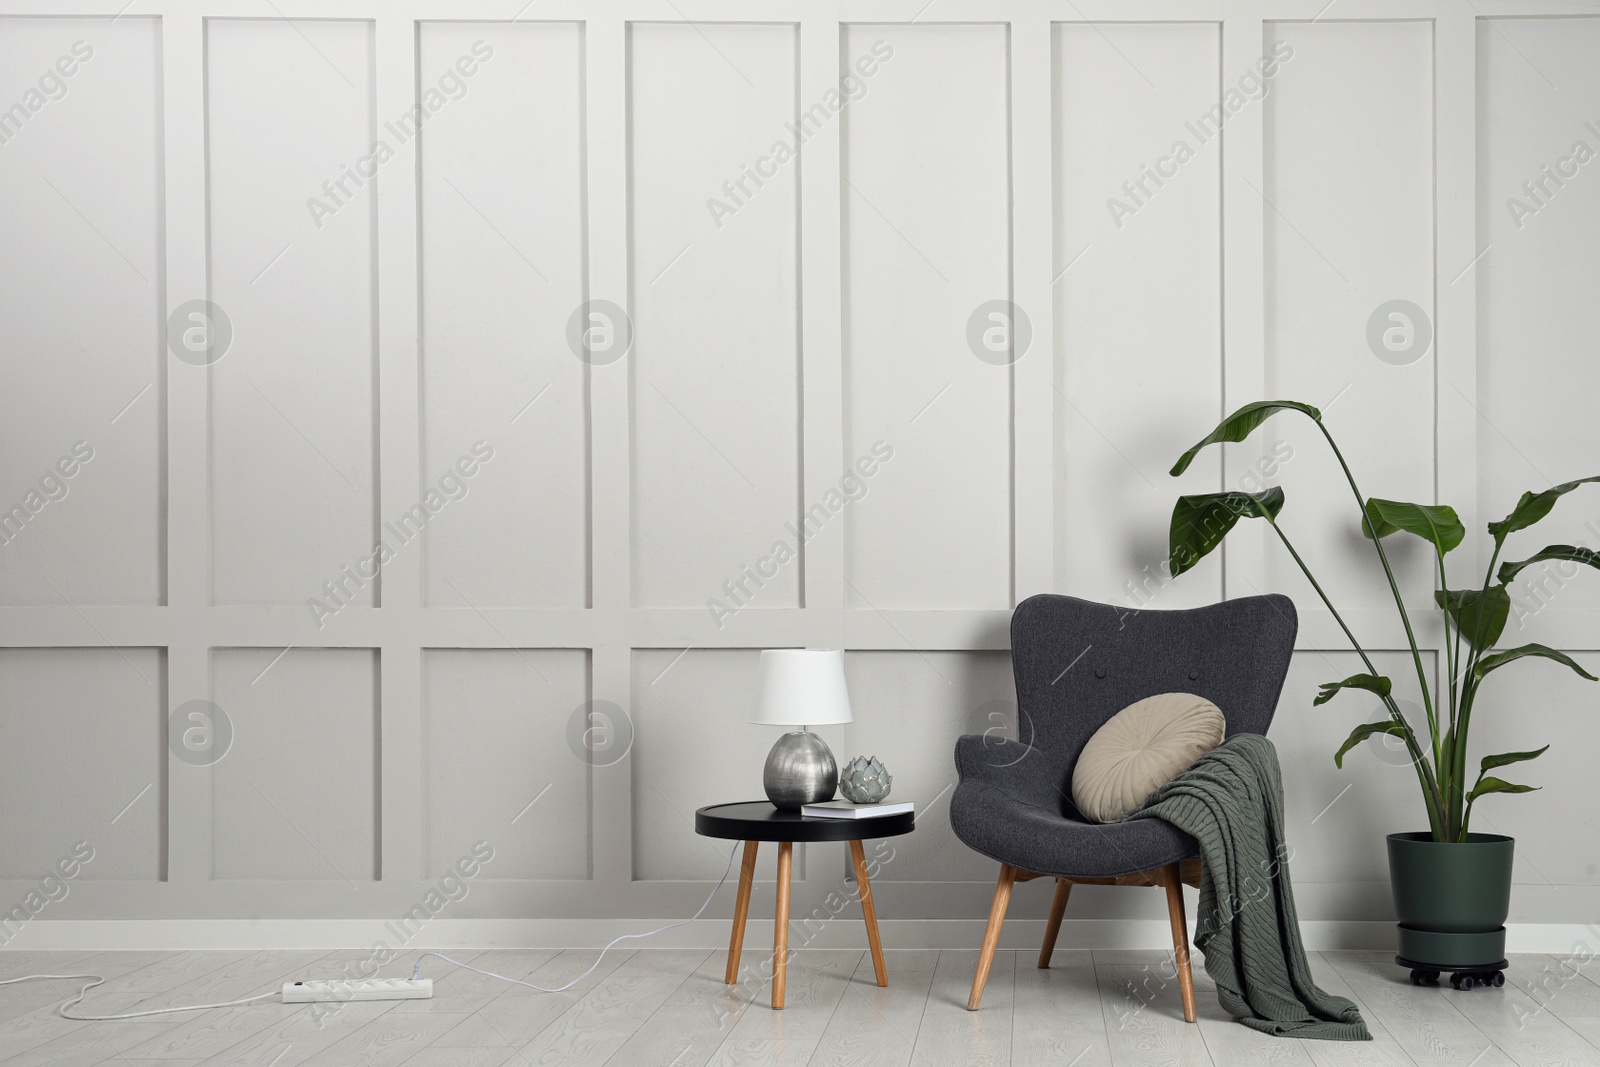 Photo of Comfortable armchair, table with lamp and houseplant near light grey wall in room, space for text. Interior design